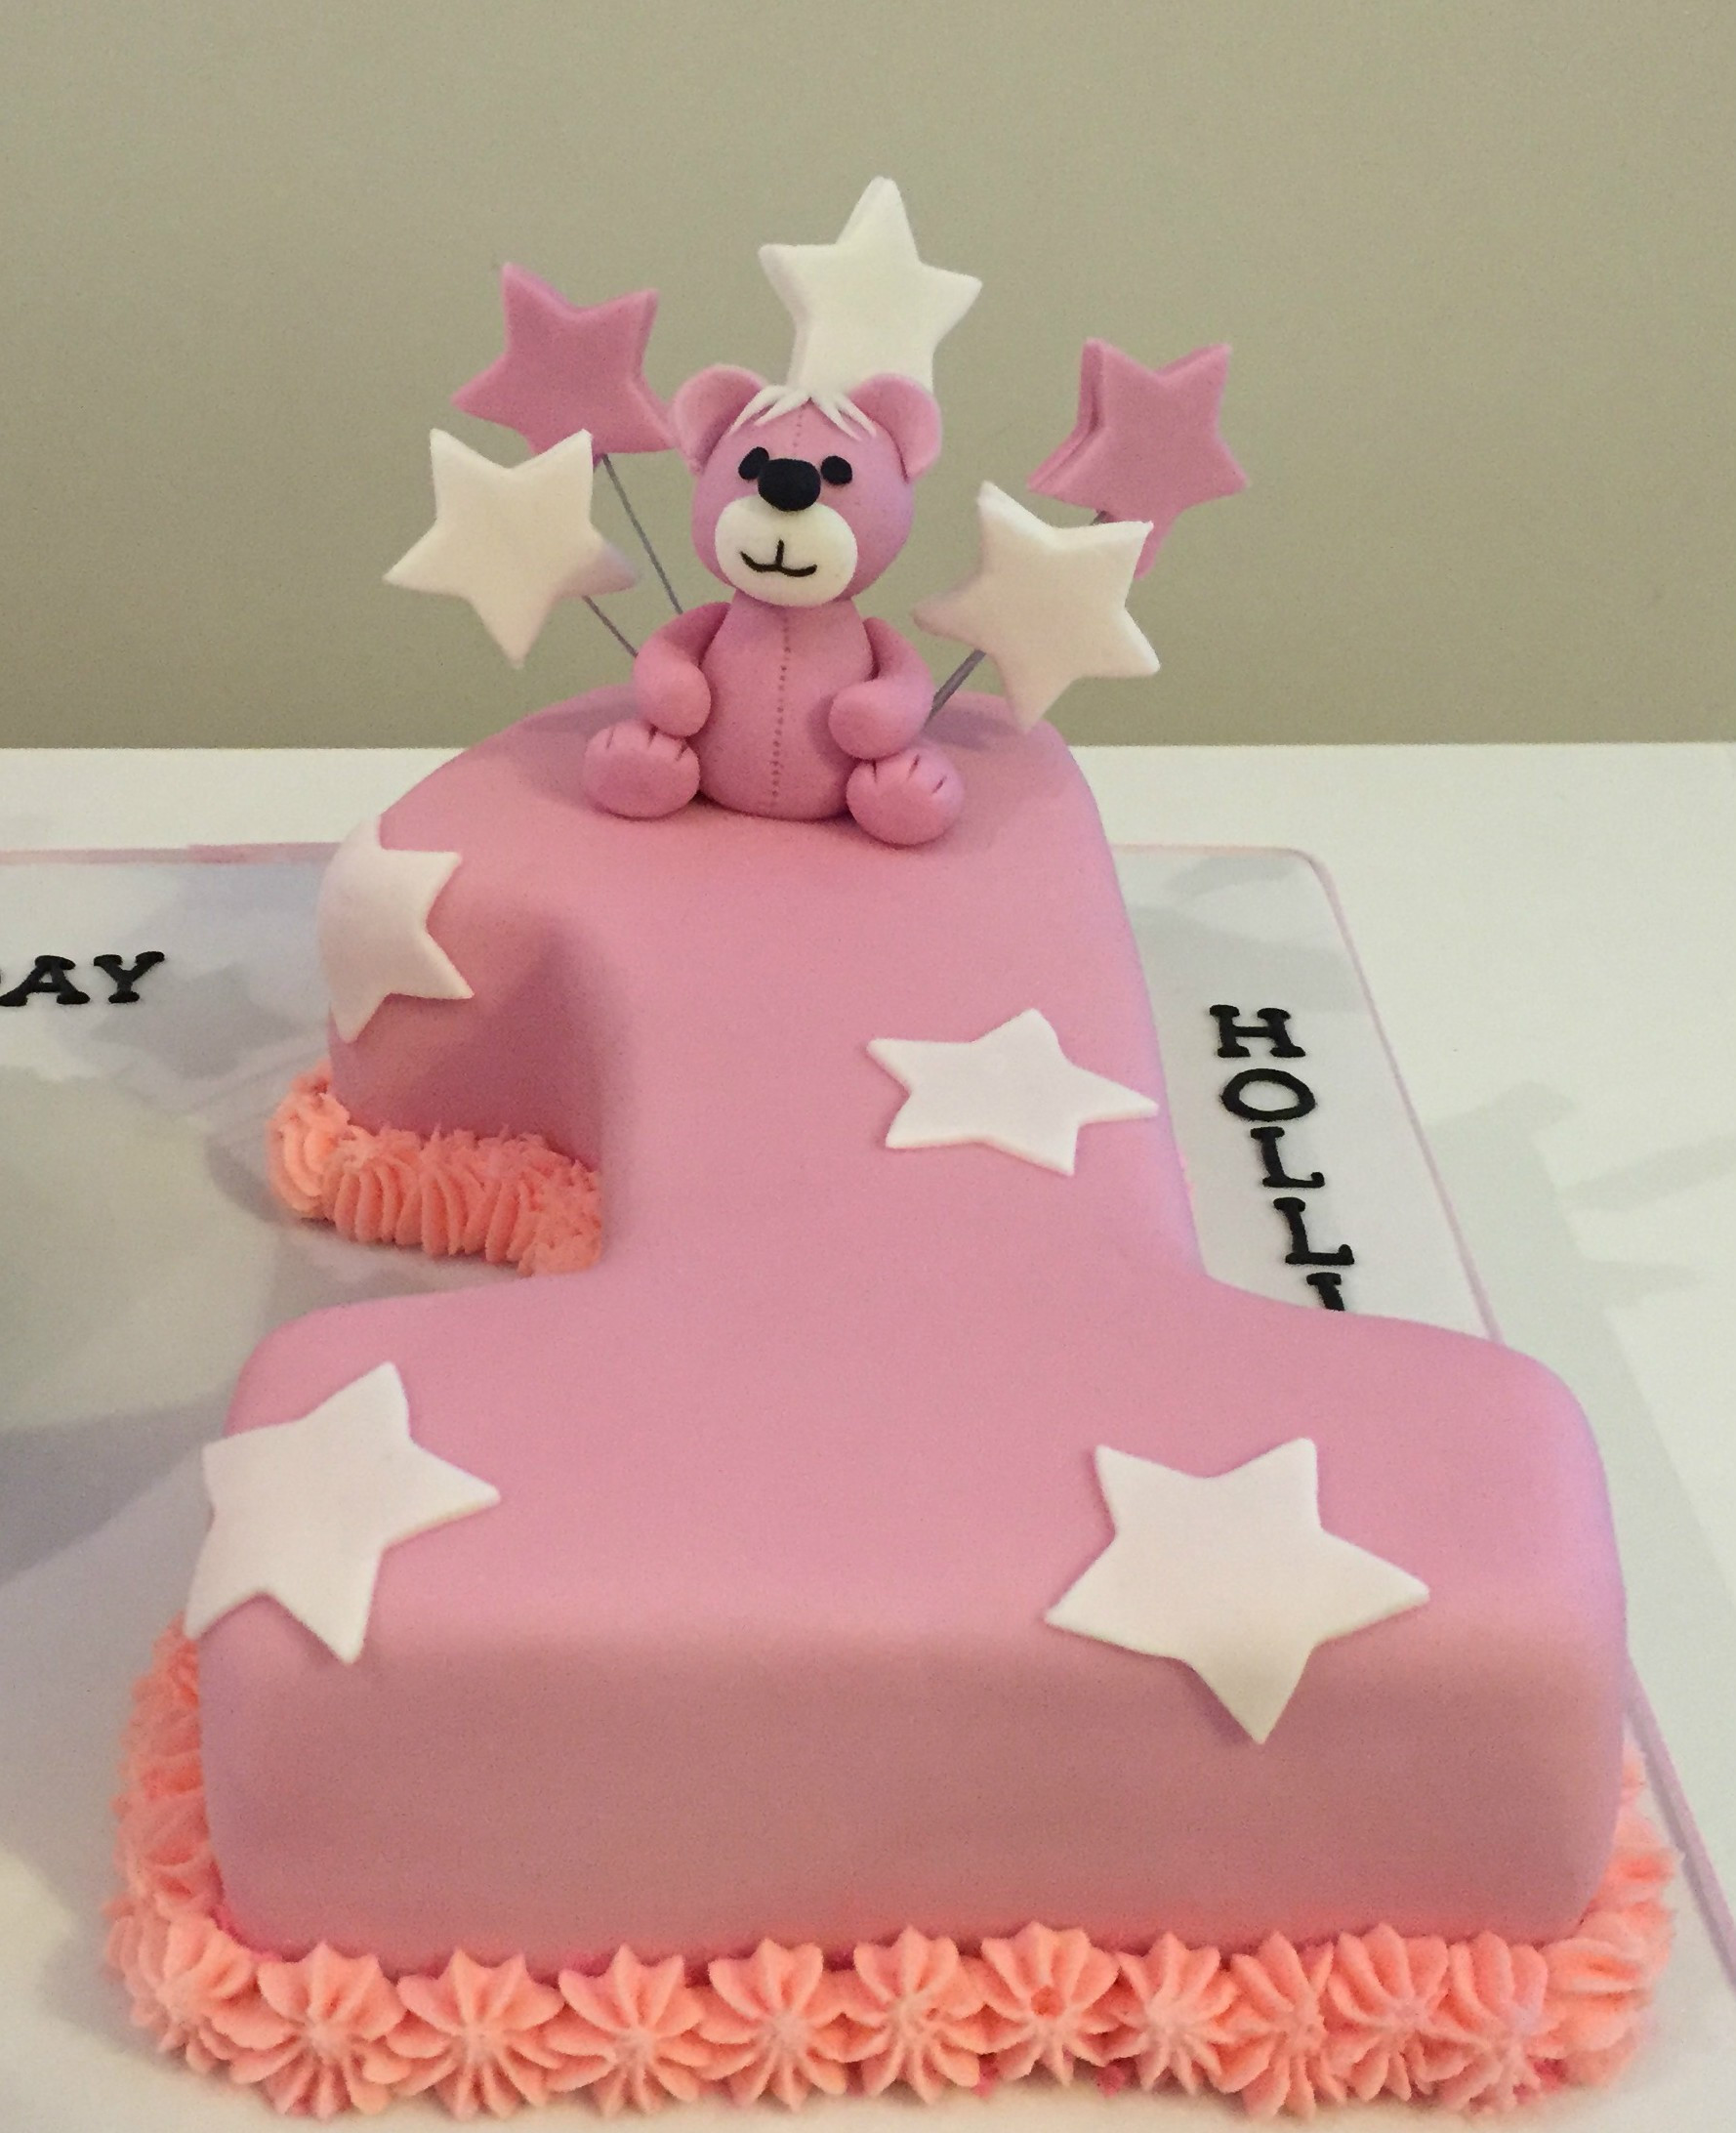 Number 1 Birthday Cake
 Home Baked And Decorated Childrens Birthday Cakes in Sydney